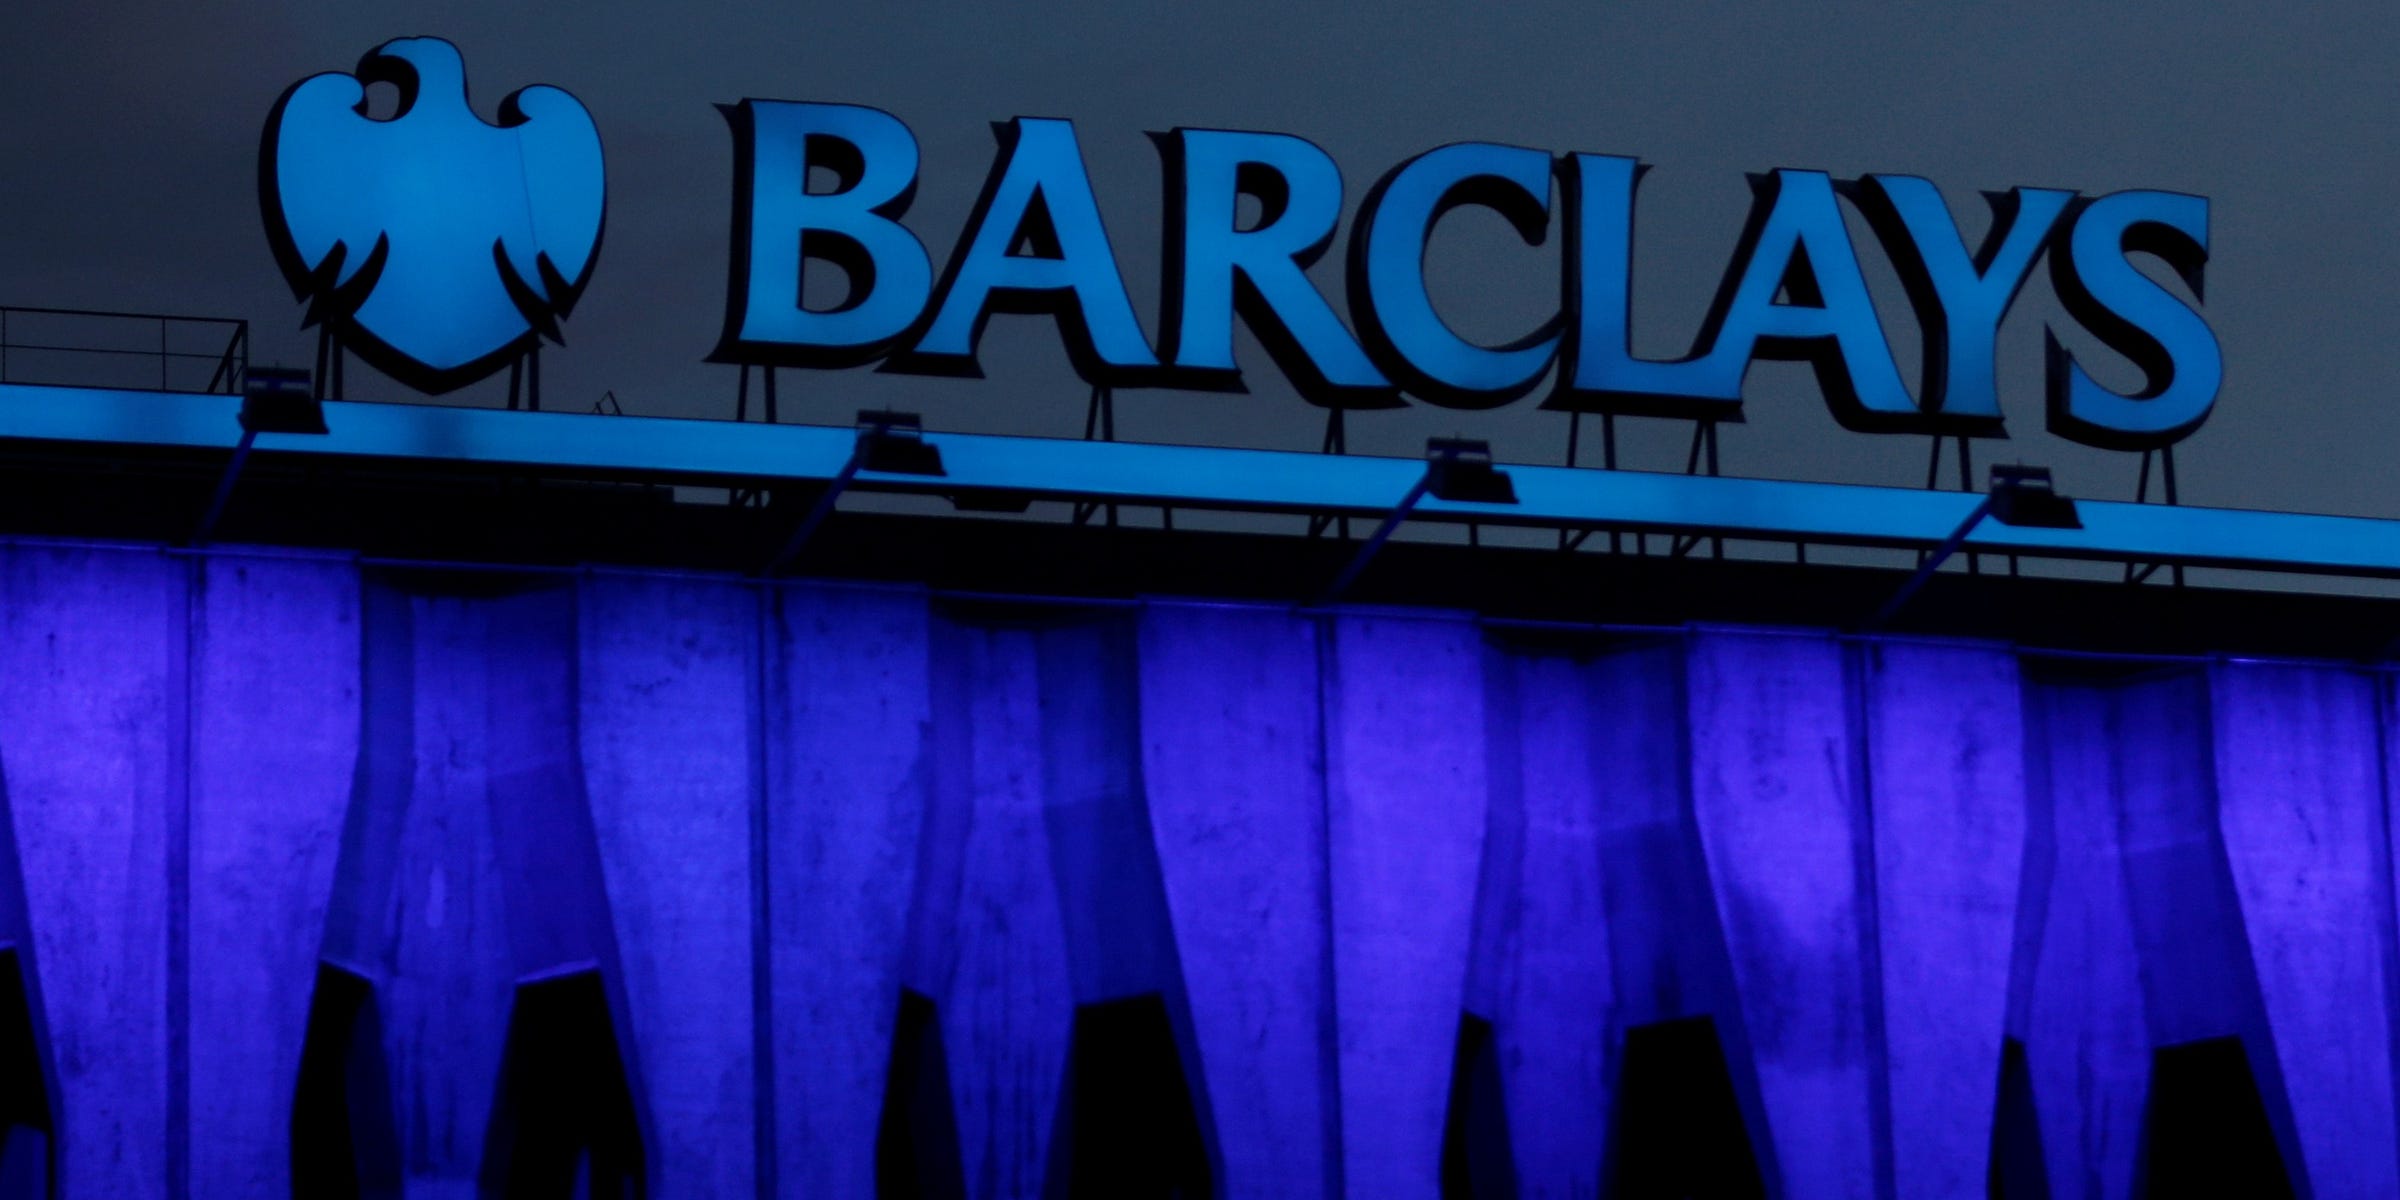 Barclays profits plunge 66% for the first half of 2020 as it sets aside $4.7 billion to brace for pandemic pain